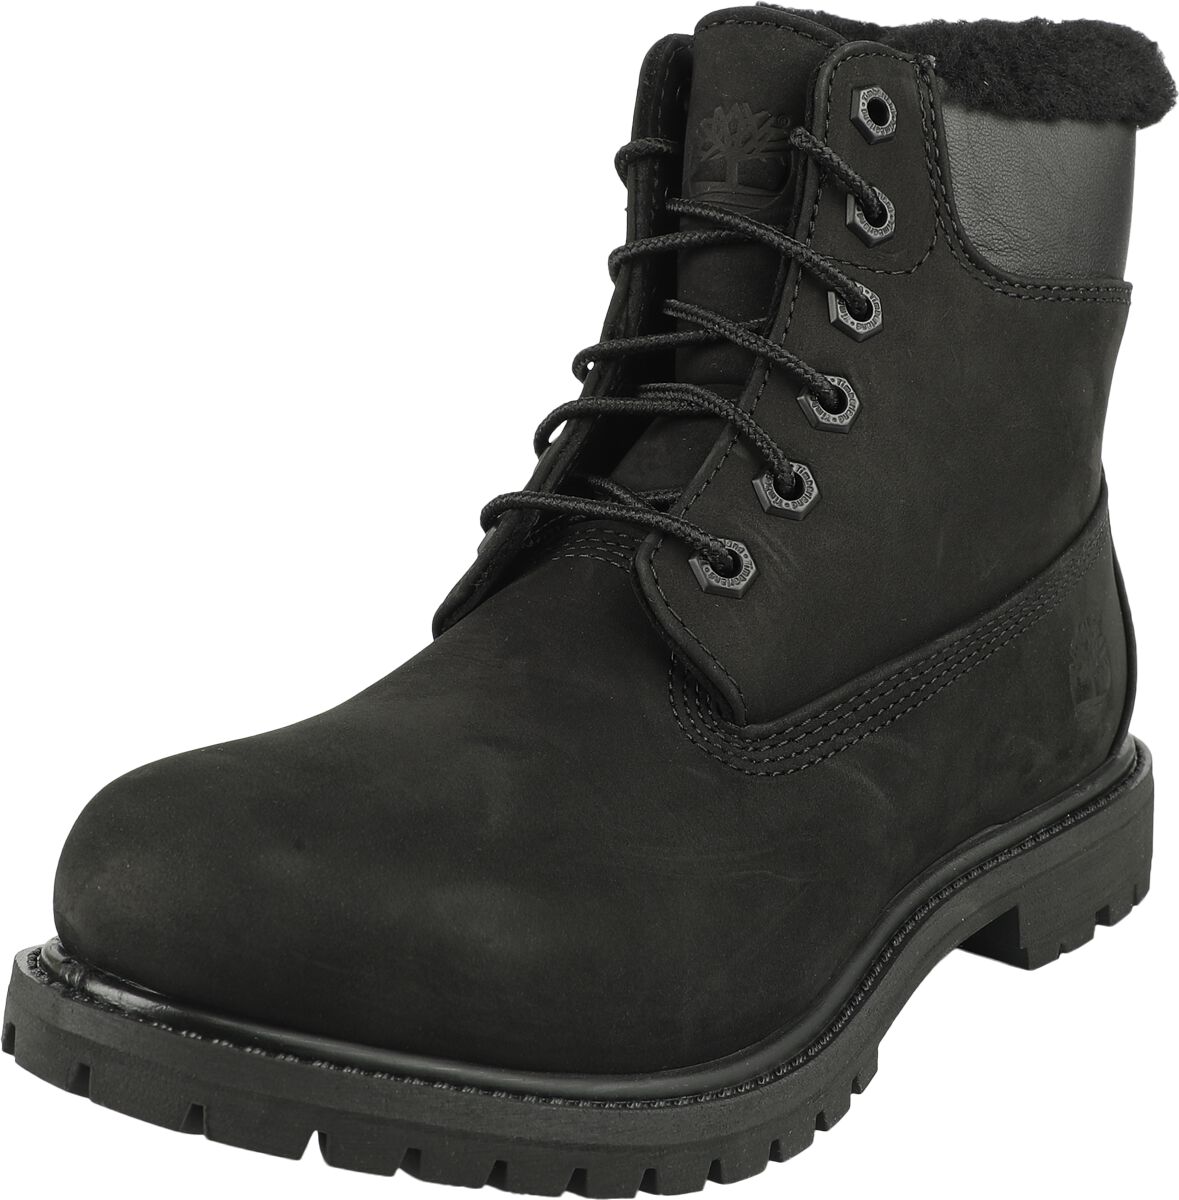 Timberland 6 Inch Premium Shearling Lined WP Boot Boot schwarz in EU38